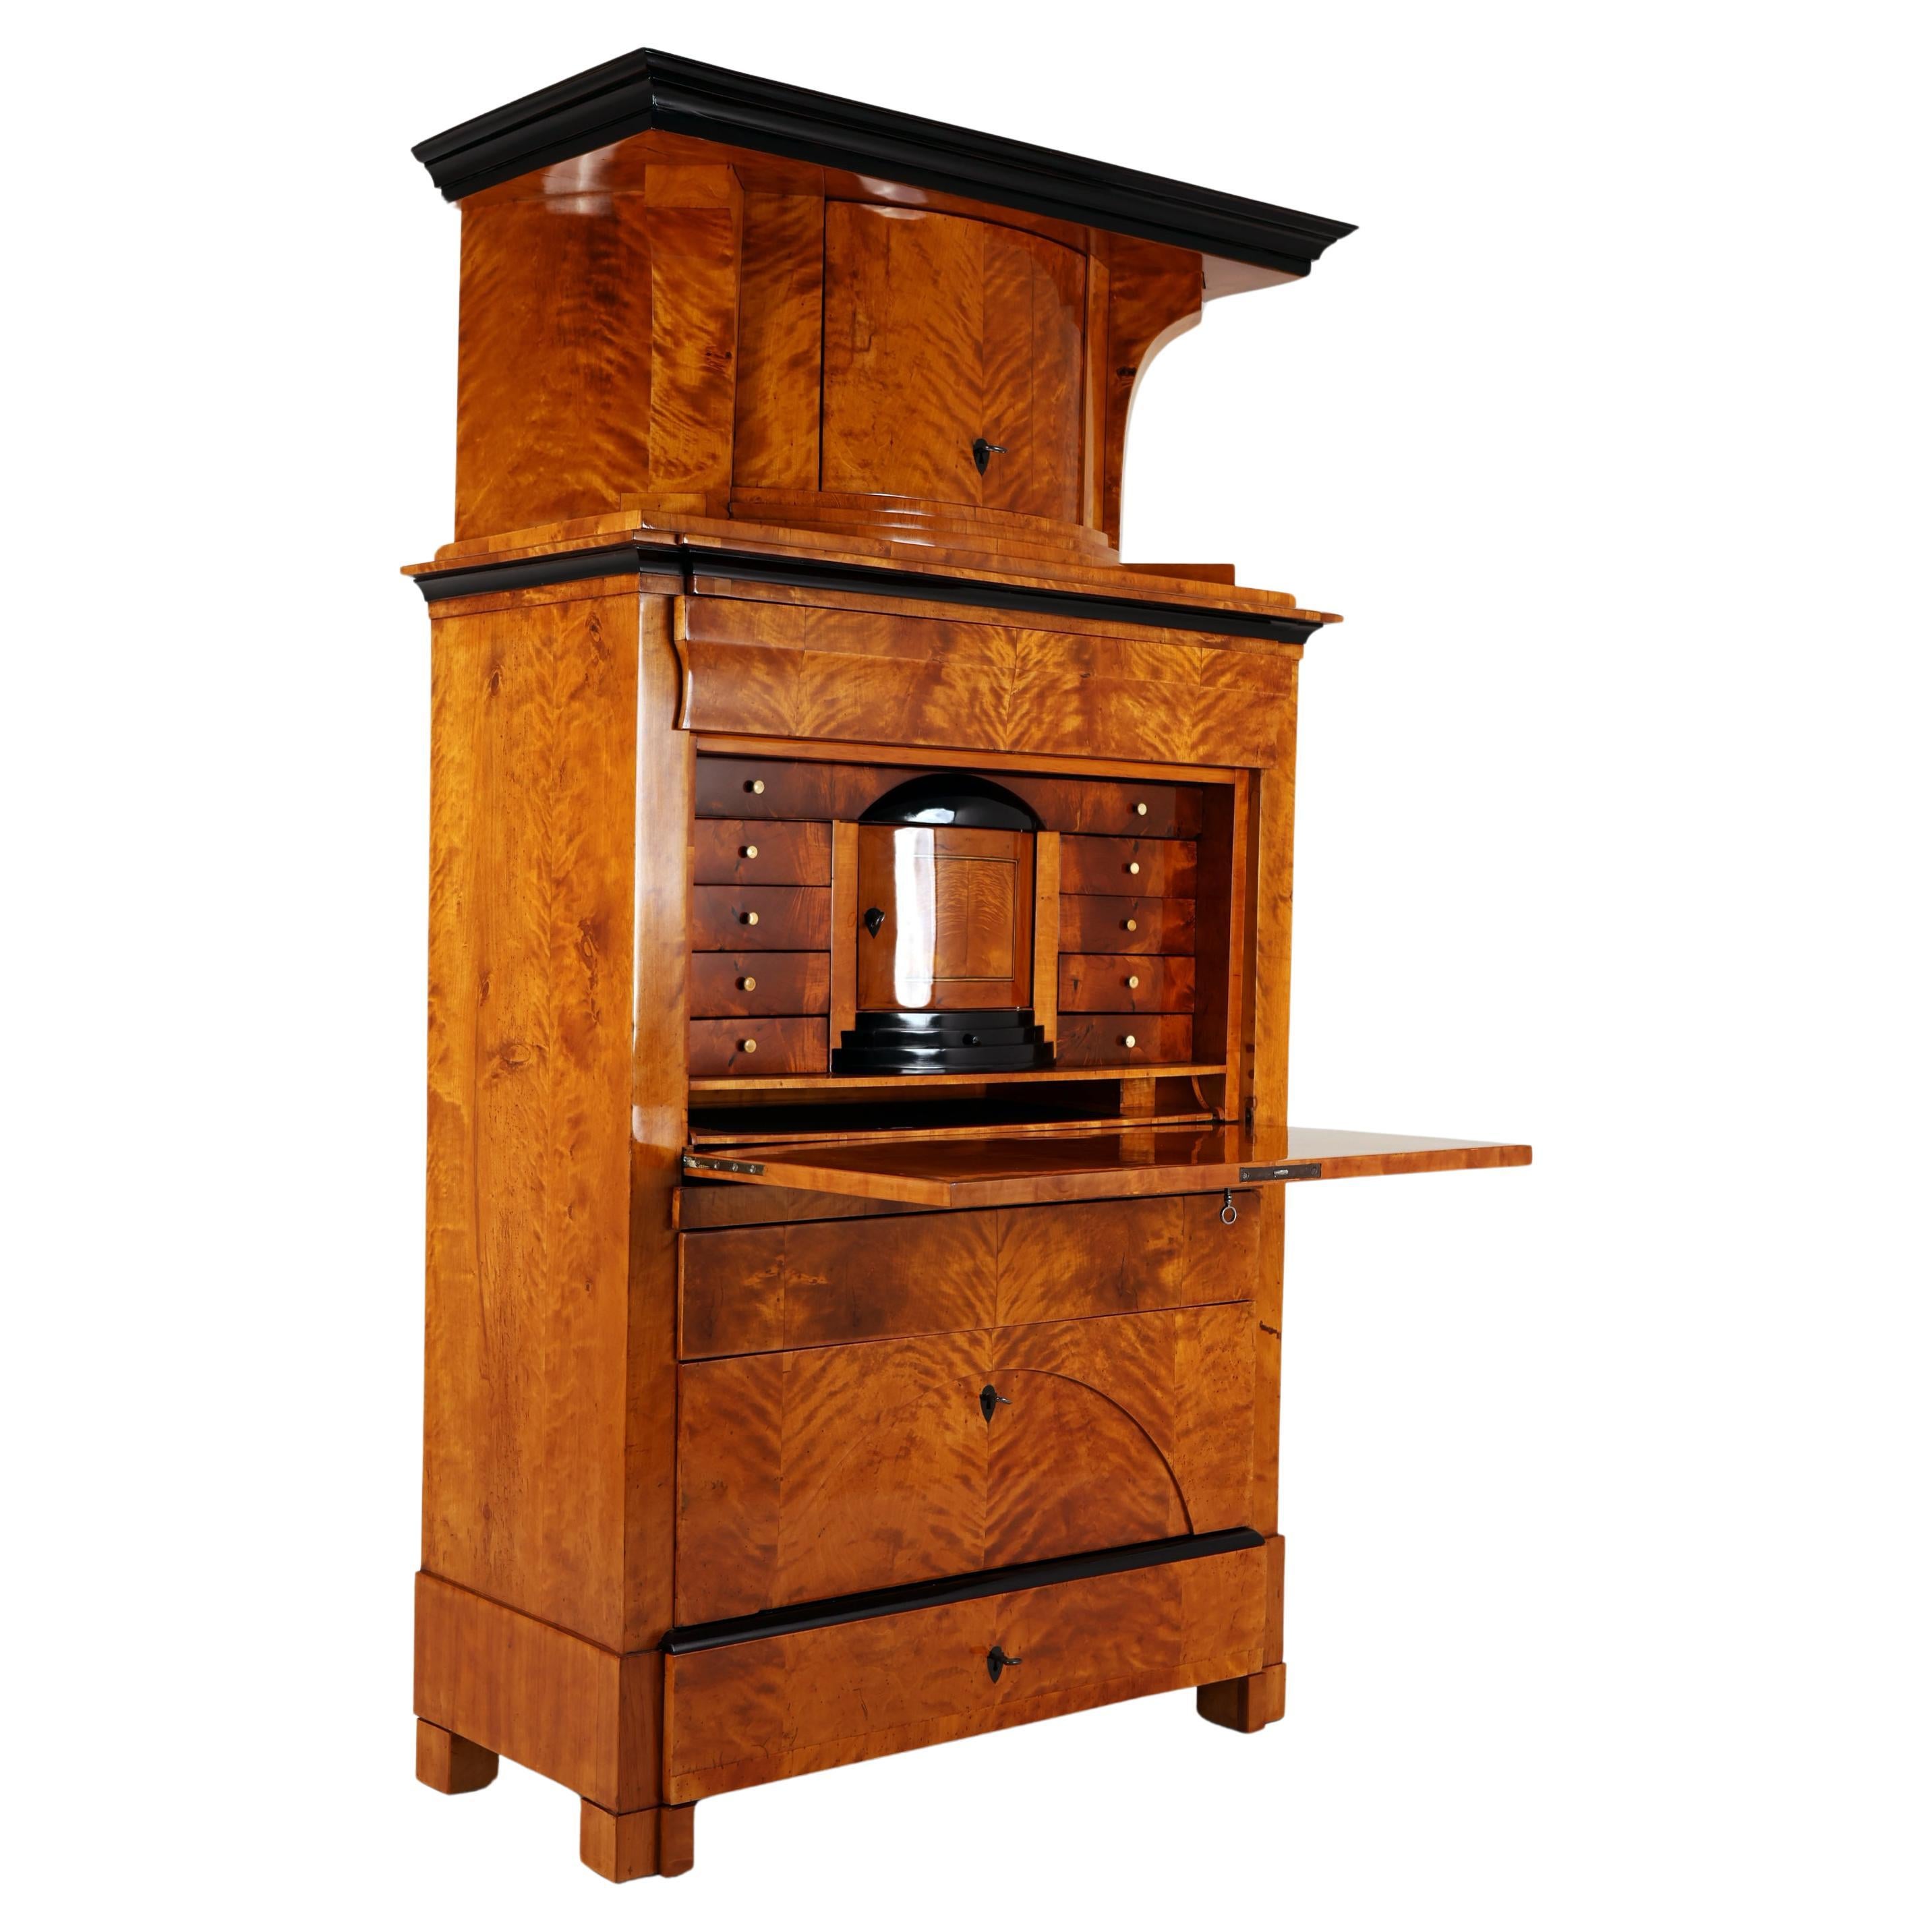 Early 19th Century Biedermeier Secretary, 
Germany, 1820
Birchwood 

Antique Biedermeier secretary made of birch wood, handmade in Berlin around 1820. With its dimensions of 110 x 52 x 197 cm, it offers plenty of storage space thanks to its four